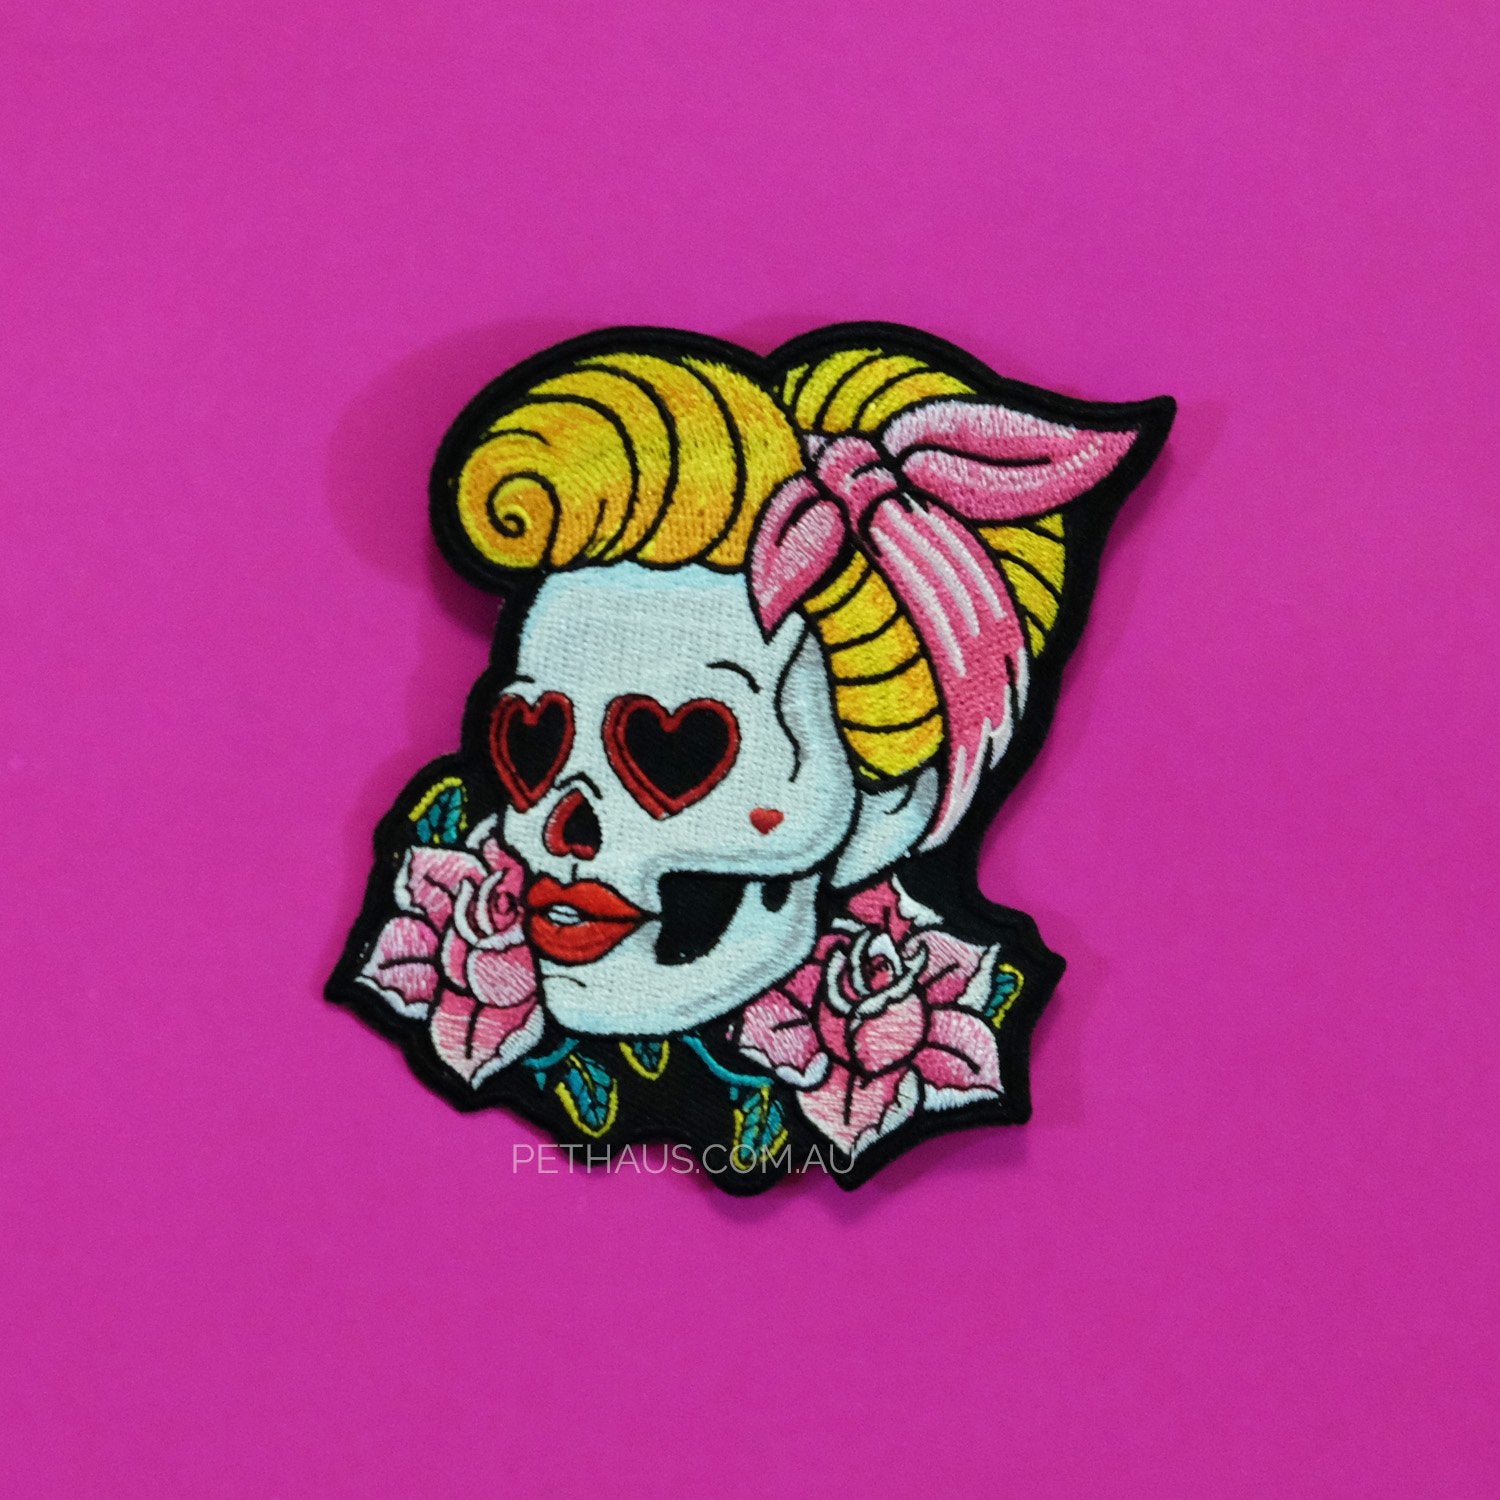 rockabilly girl patch, pin up girl patch, day of the dead patch, tattoo style patch, skull patch